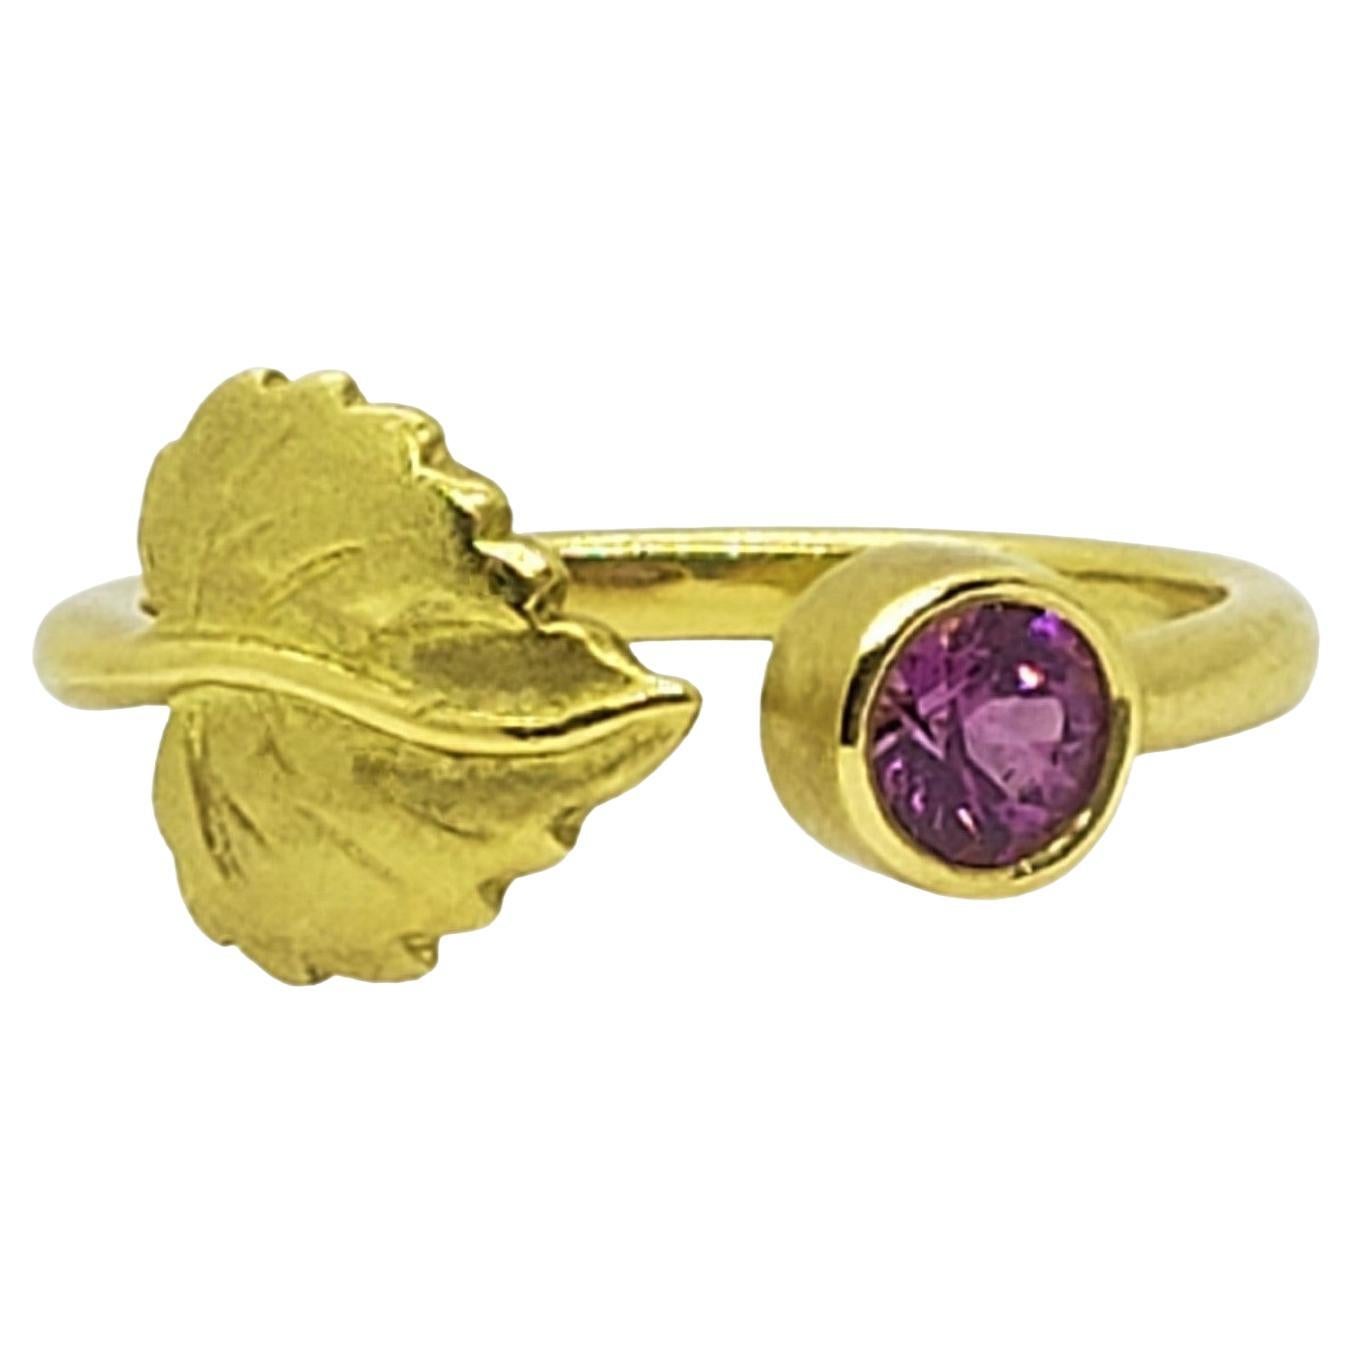 Stackette 18K Gold Gemstone Ring Collection highlighting the Aspen Leaf Style